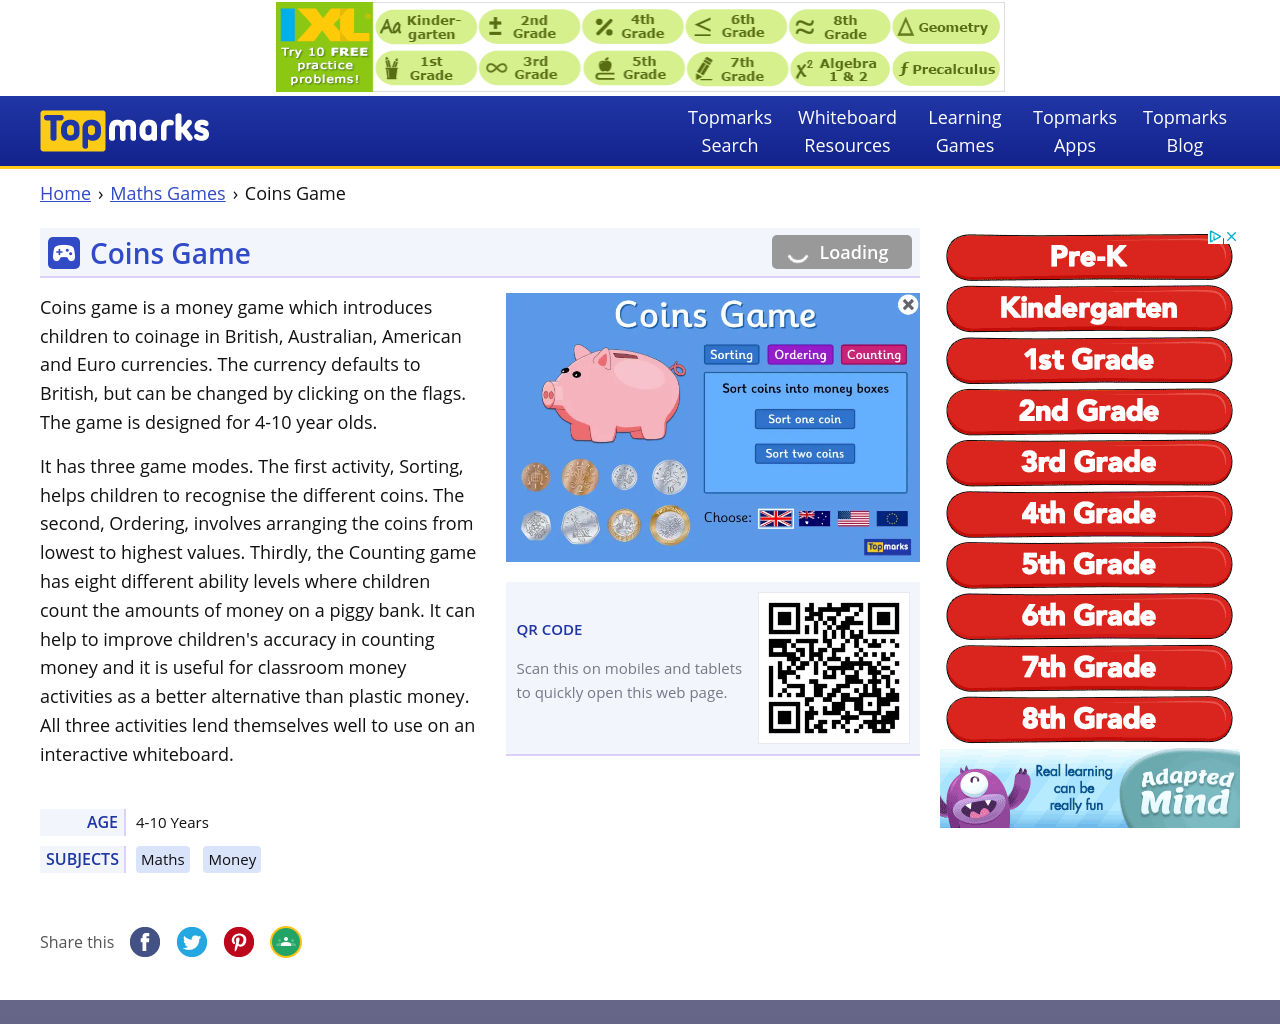 Topmarks Coins Game